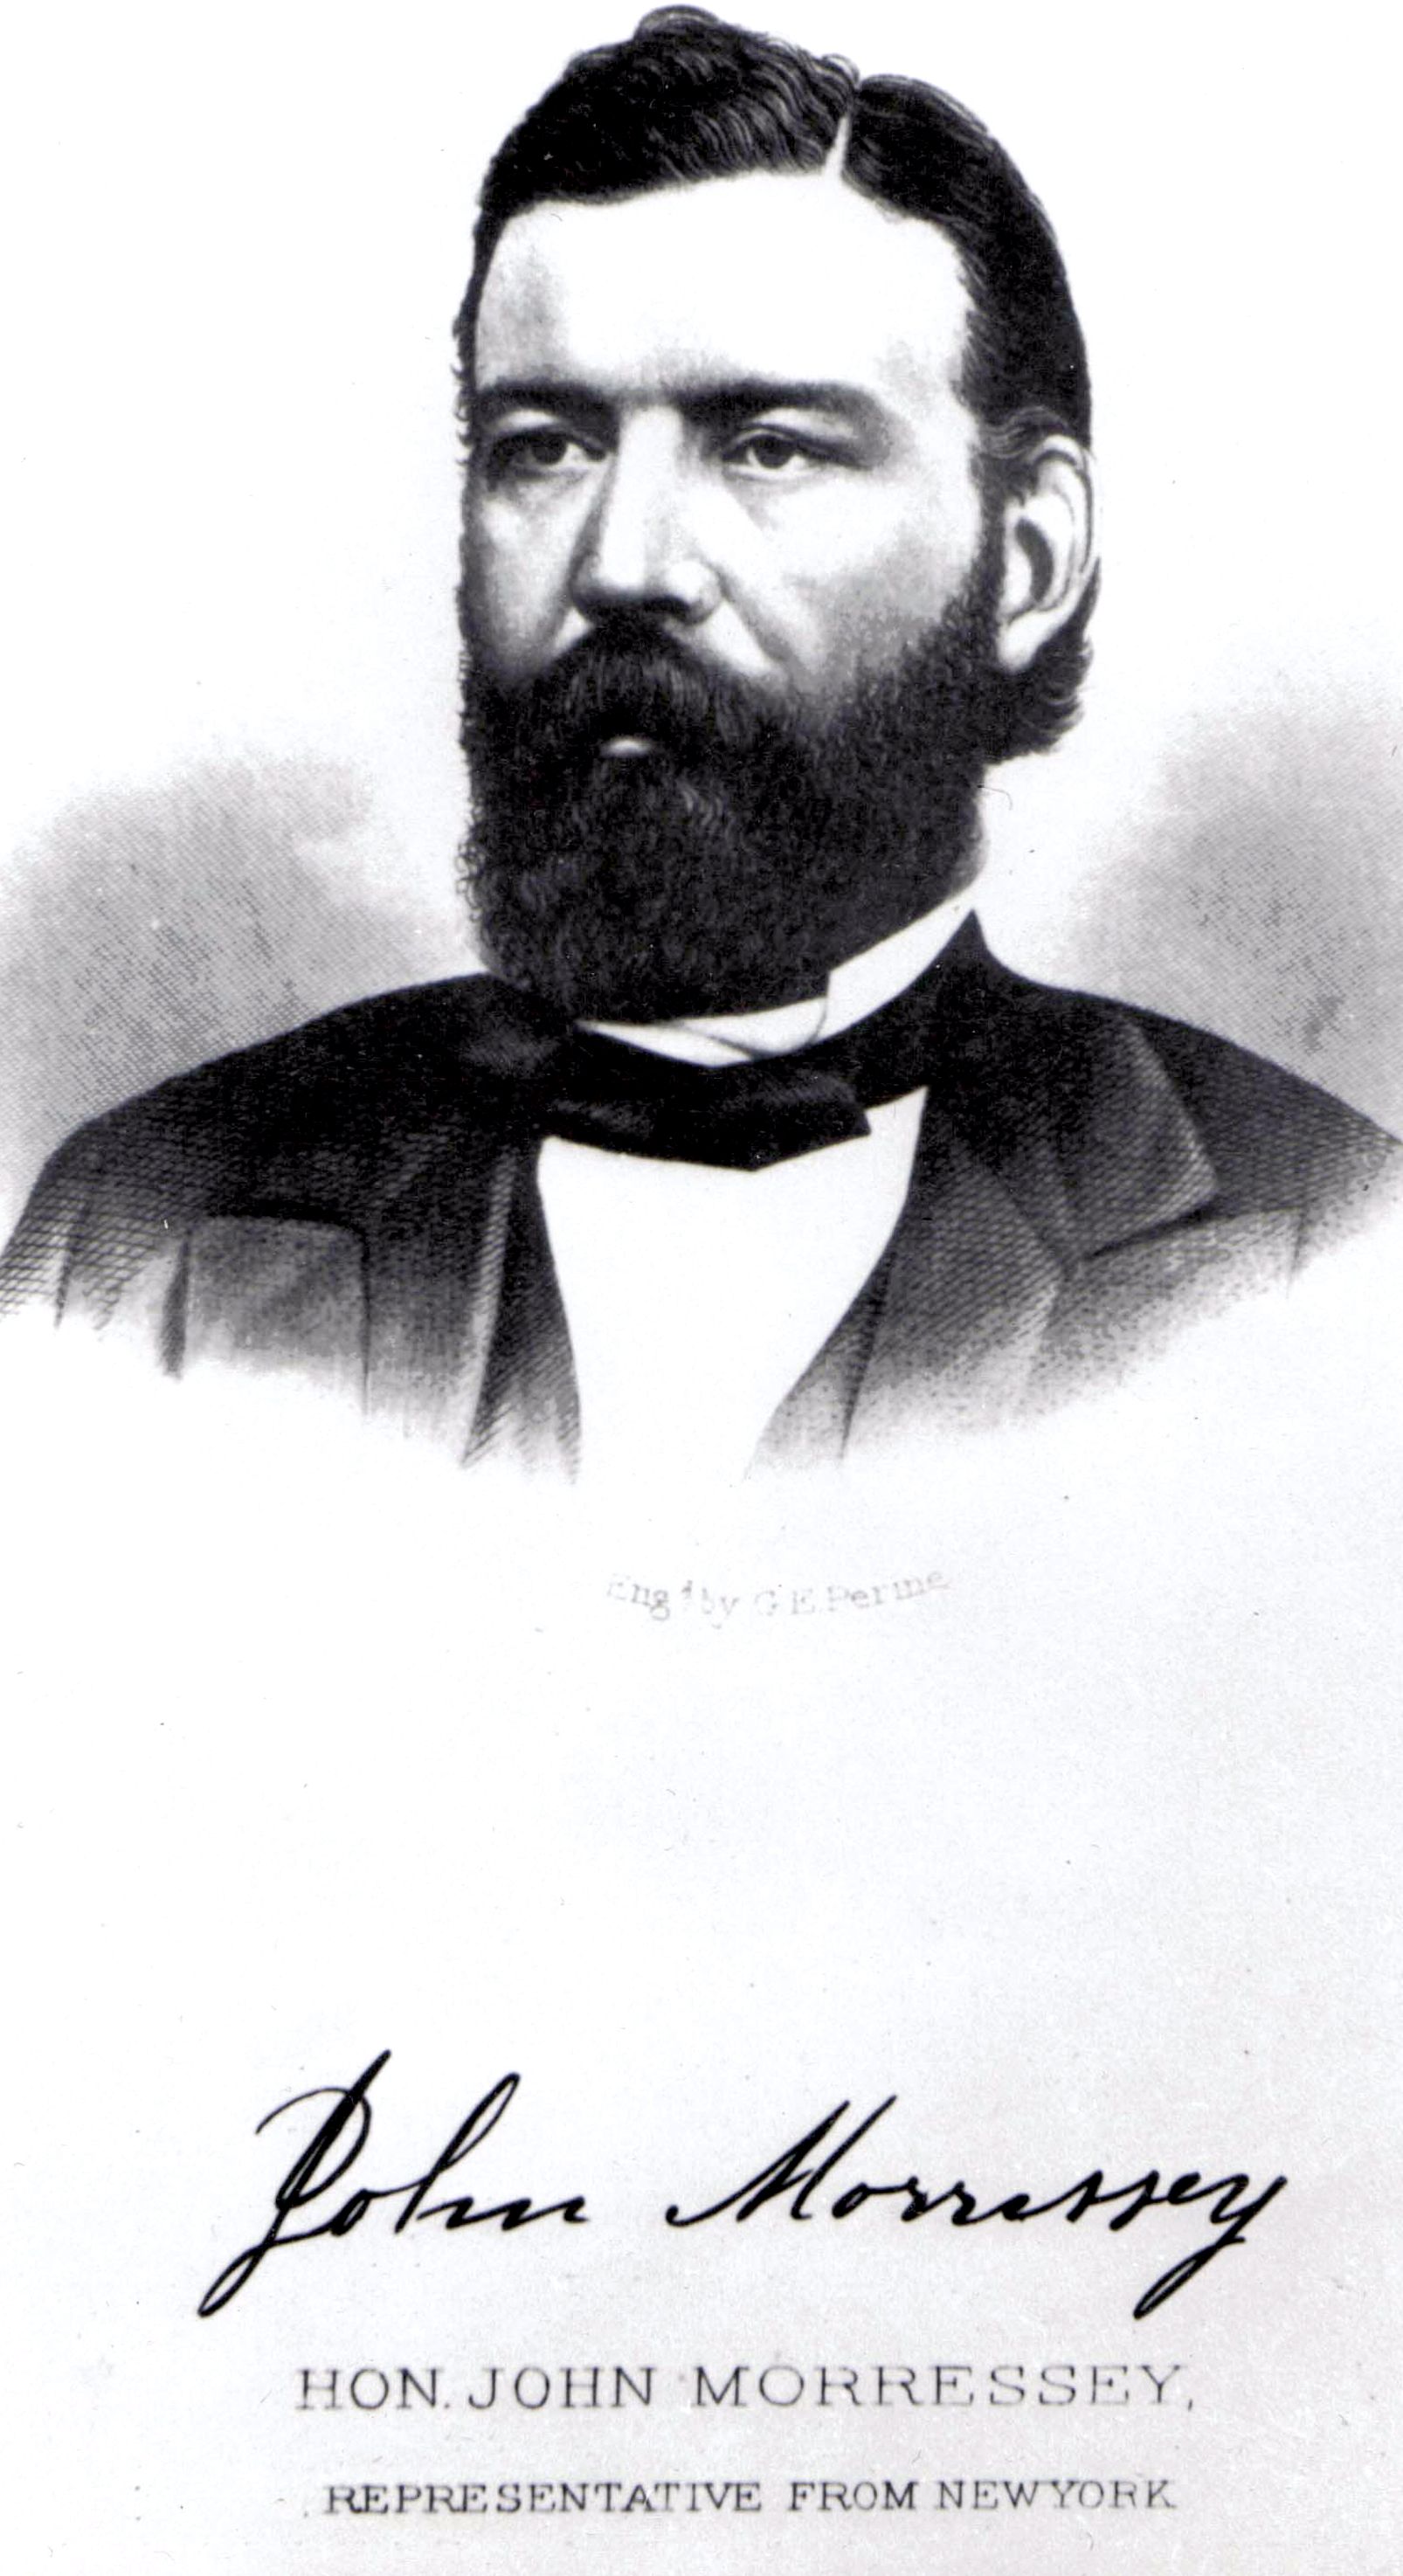 John Morrissey, from "The American Turf" (Museum Collection)